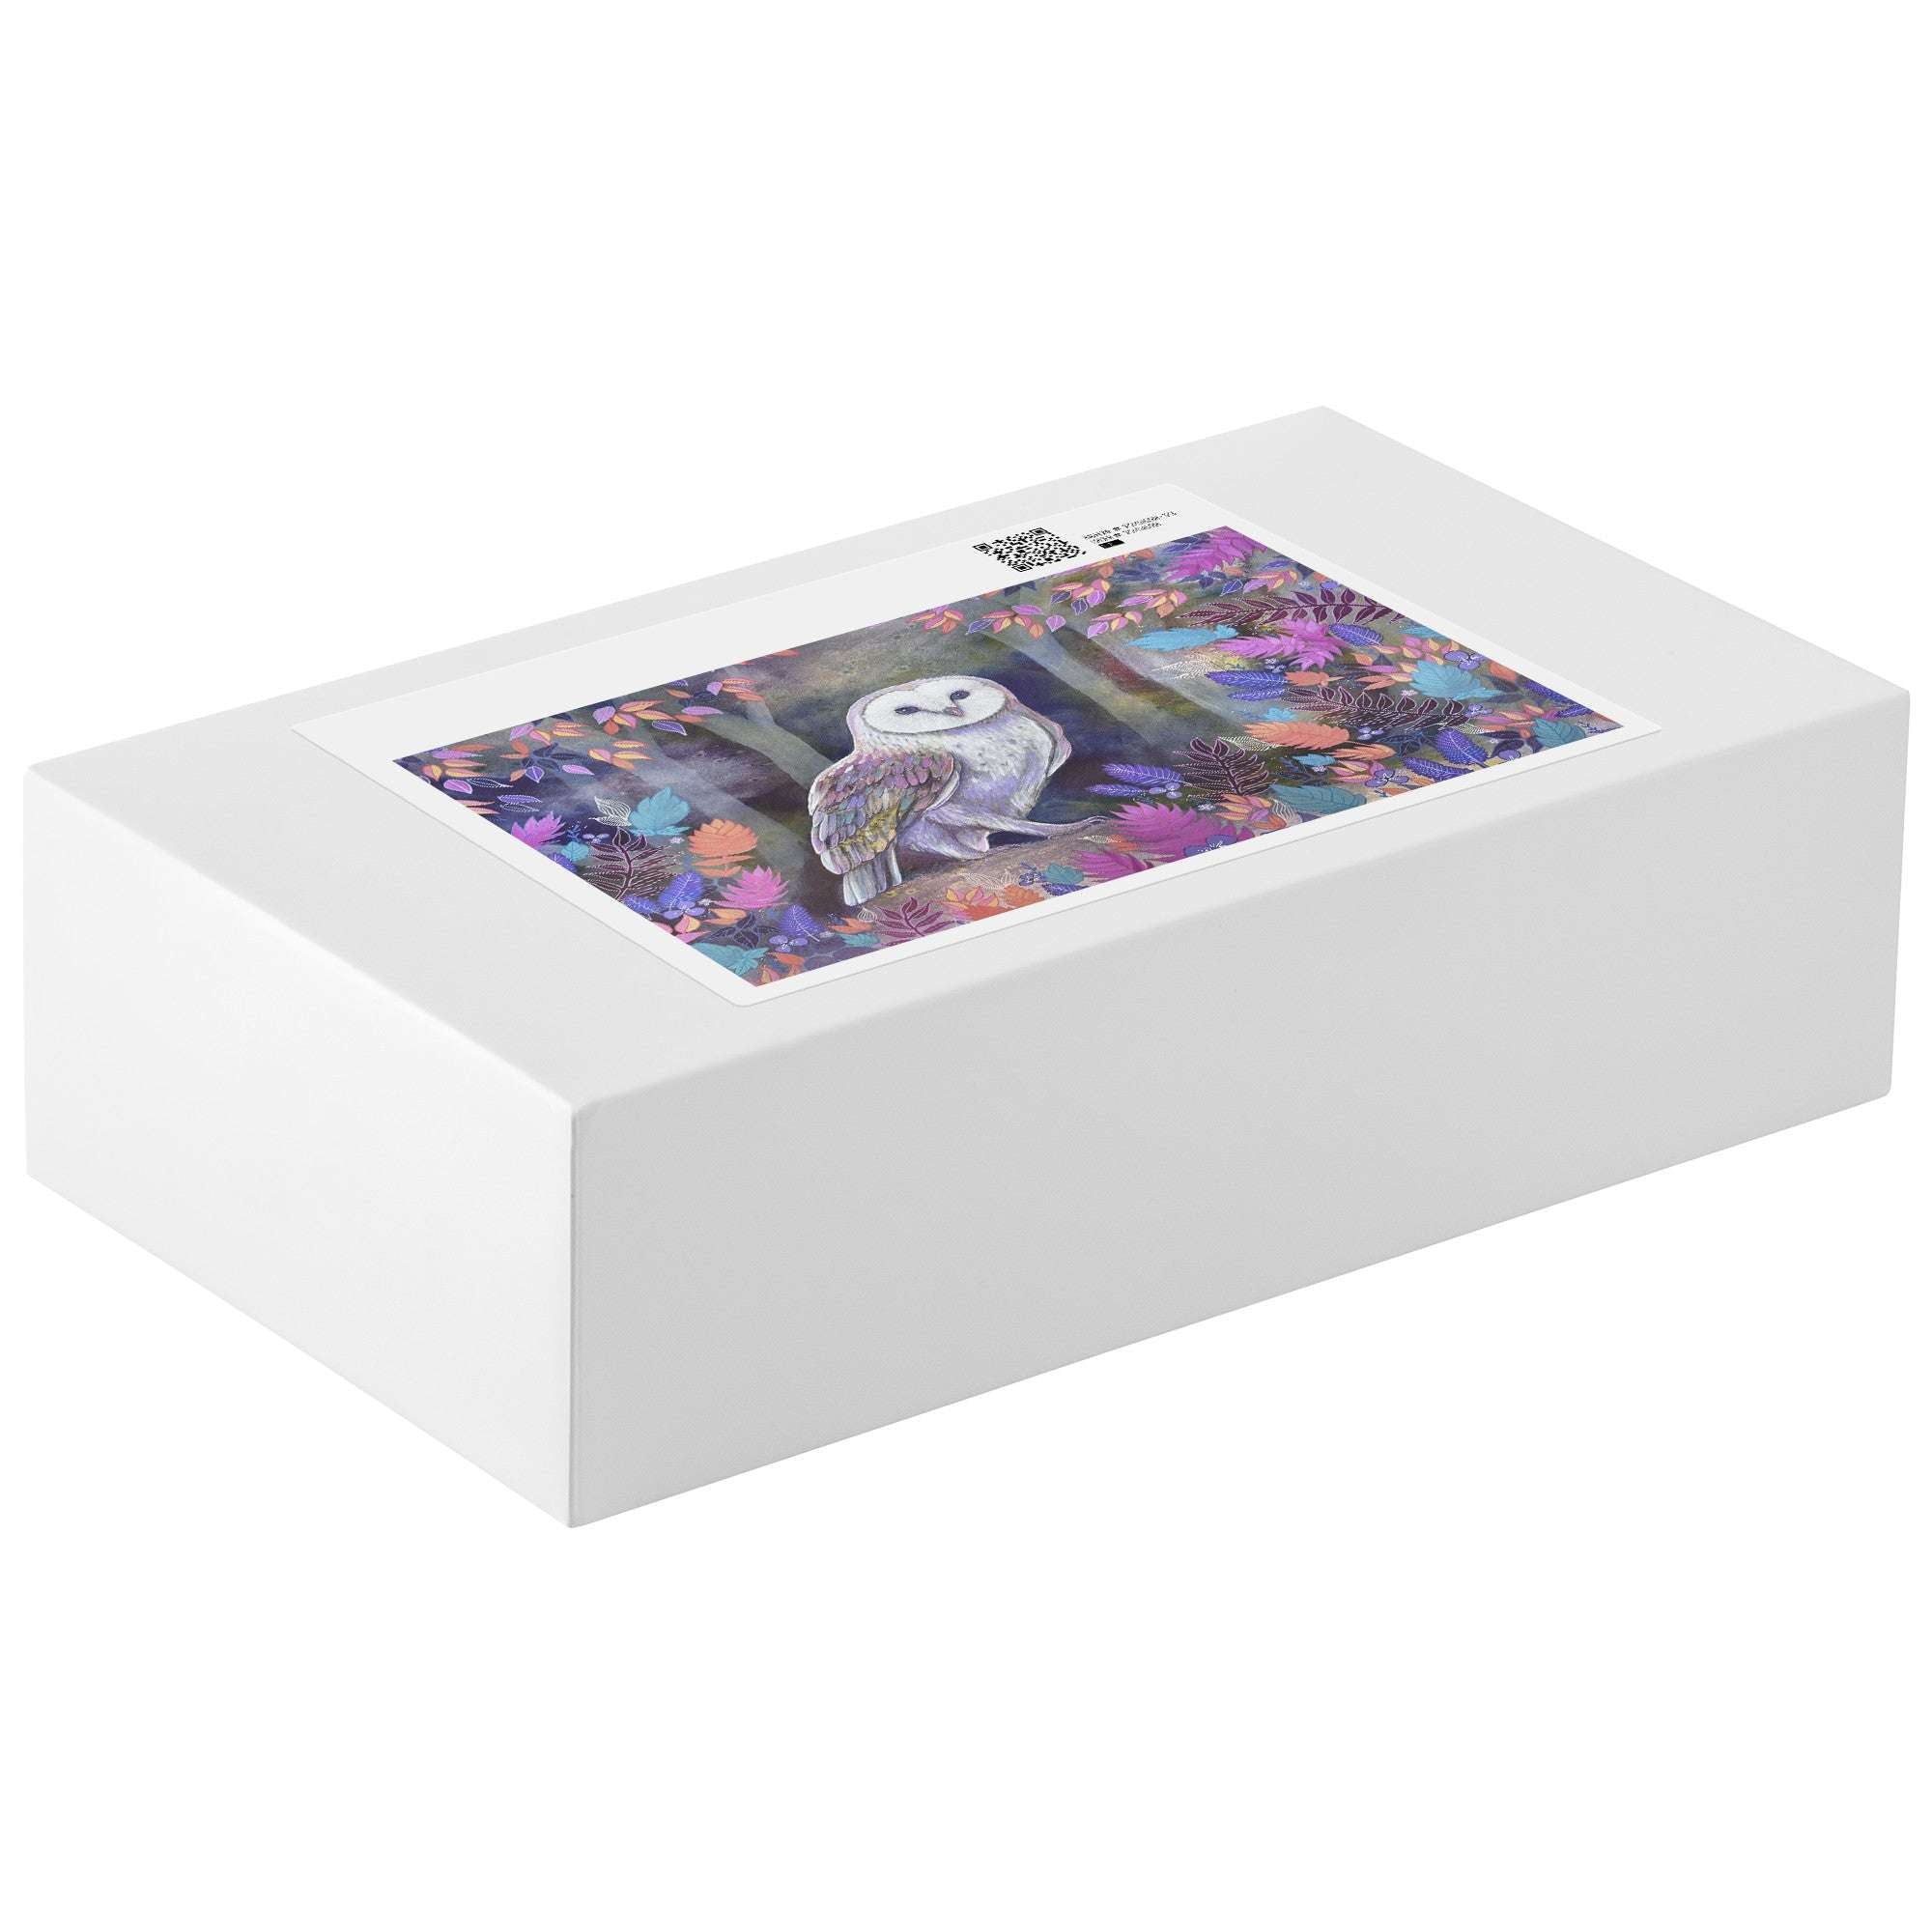 An Owl Puzzle box featuring an owl sitting among purple flowers, displayed on a plain white background.